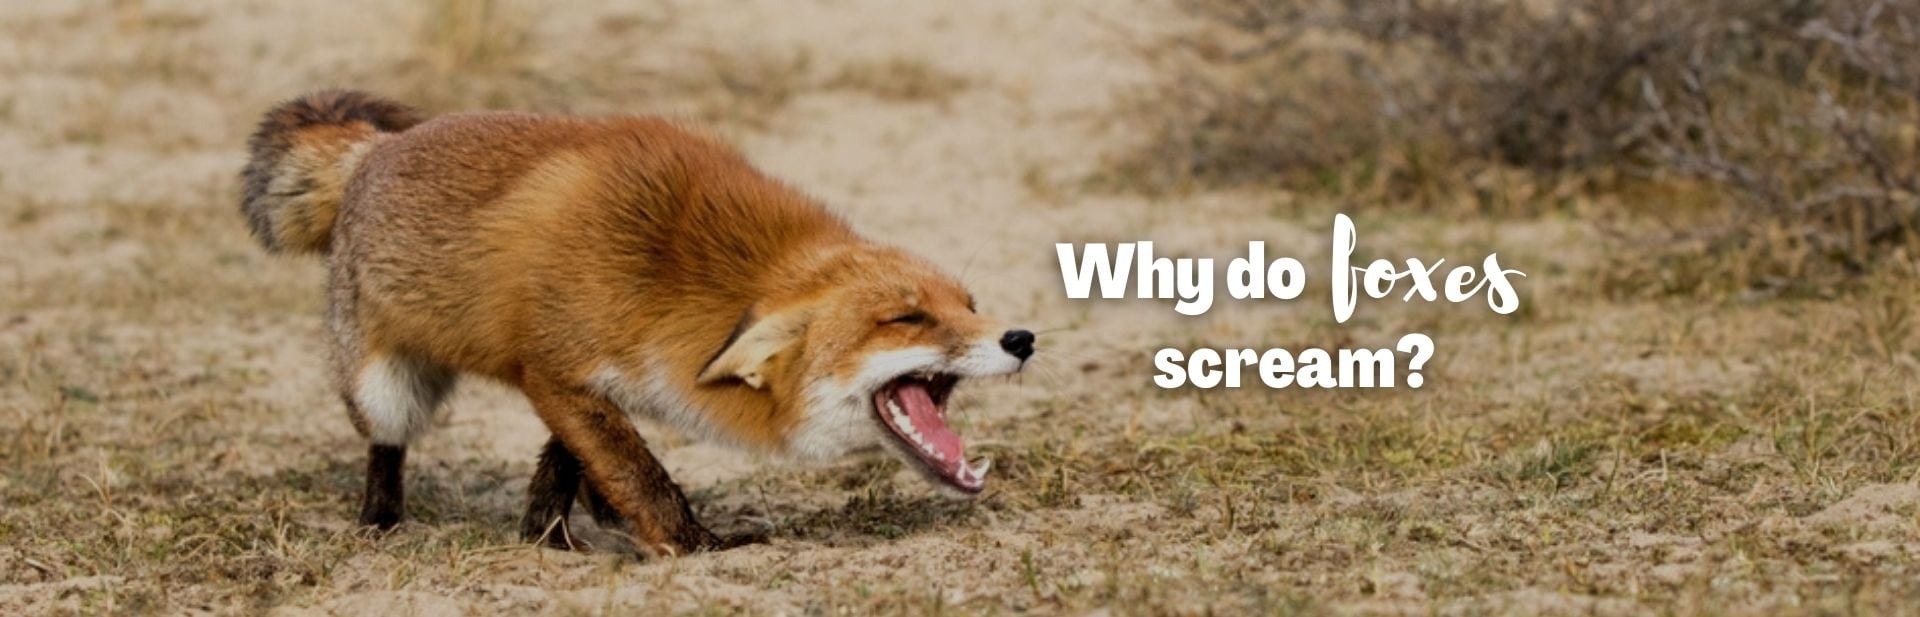 Why Do Foxes Scream? The Fascinating Language of Foxes